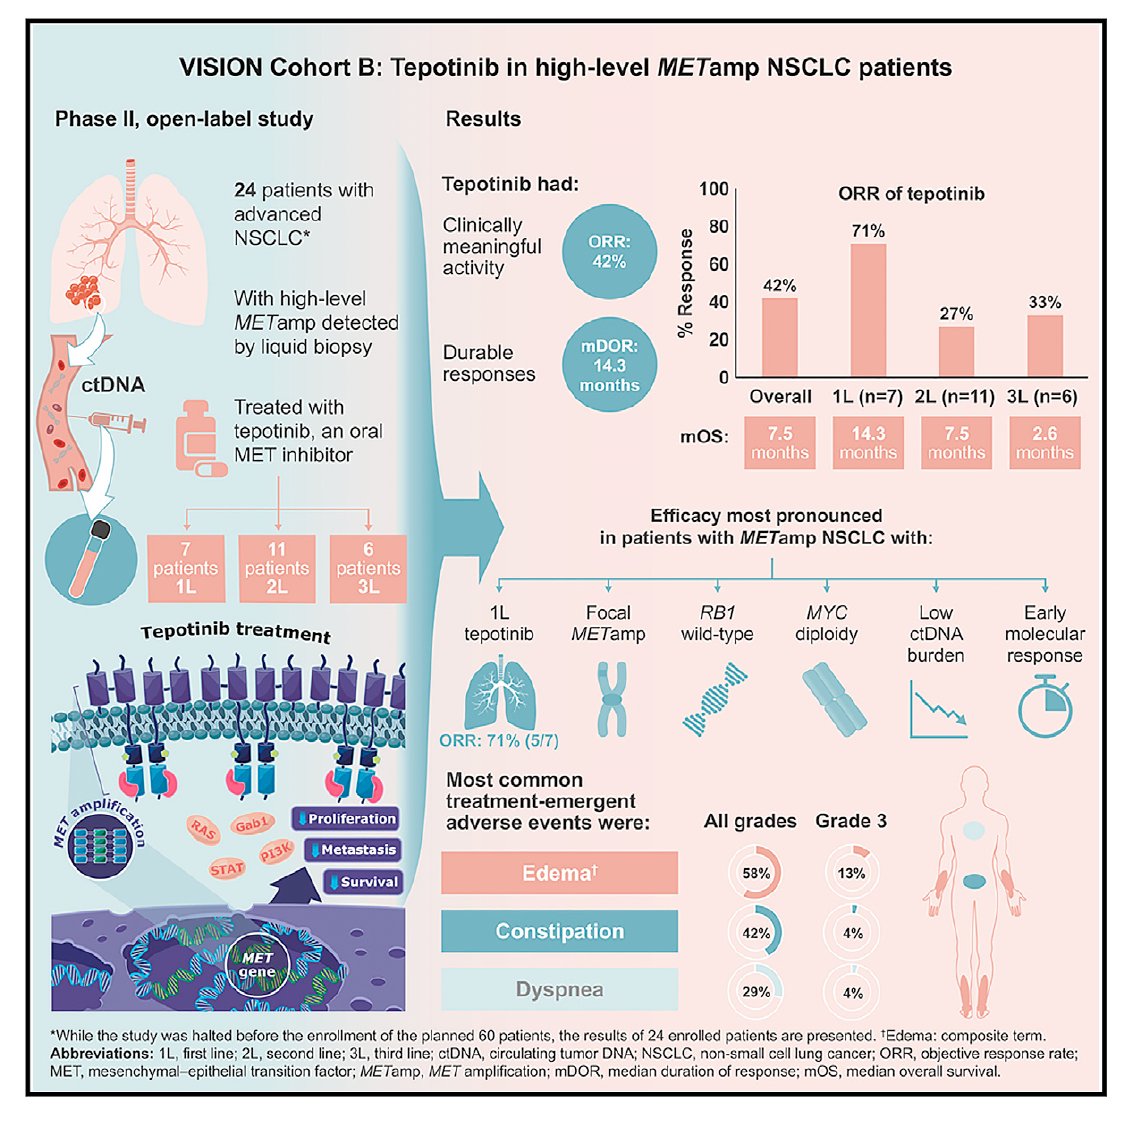 Our paper is available on line now: Tepotinib in patients with NSCLC with high-level MET amplification detected by liquid biopsy: ORR 42% DoR 14.3 months. @metcrusaders @MDAndersonNews @Exon20Group VISION Cohort B: Cell Reports Medicine cell.com/cell-reports-m…